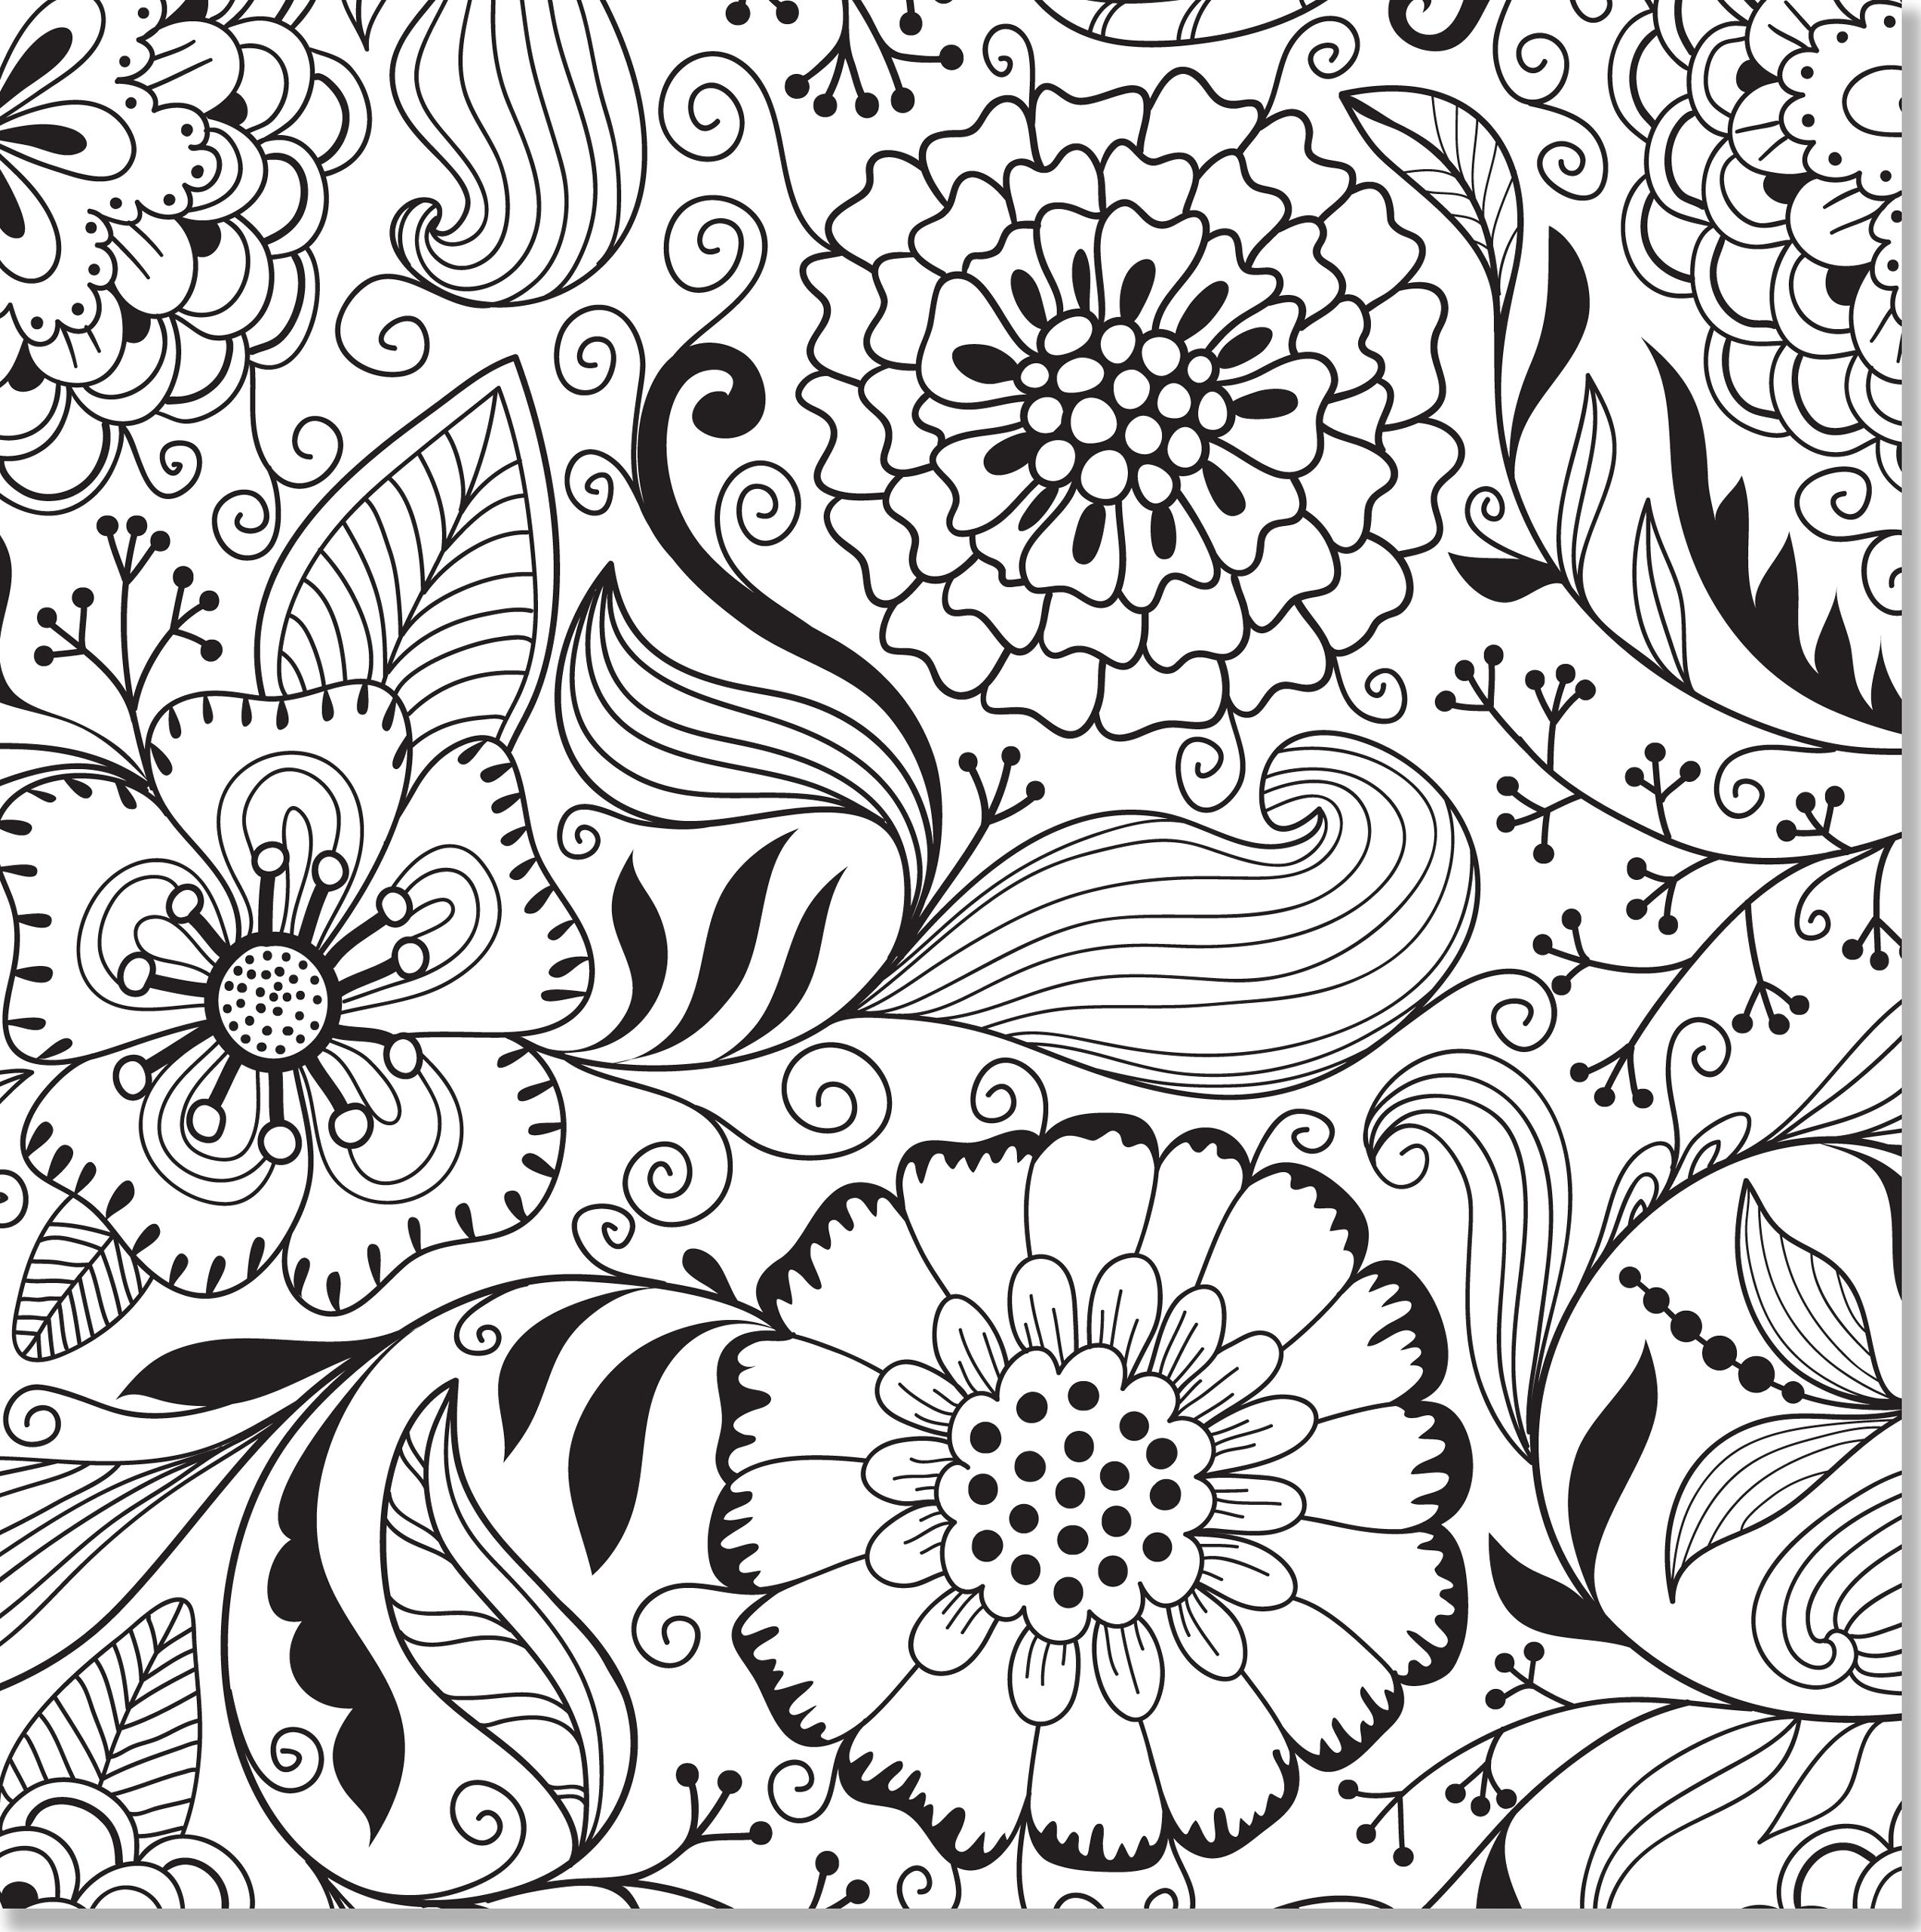 Coloring Pages : Free Printable Coloring Pages For Adults Advanced - Free Printable Coloring Pages For Adults